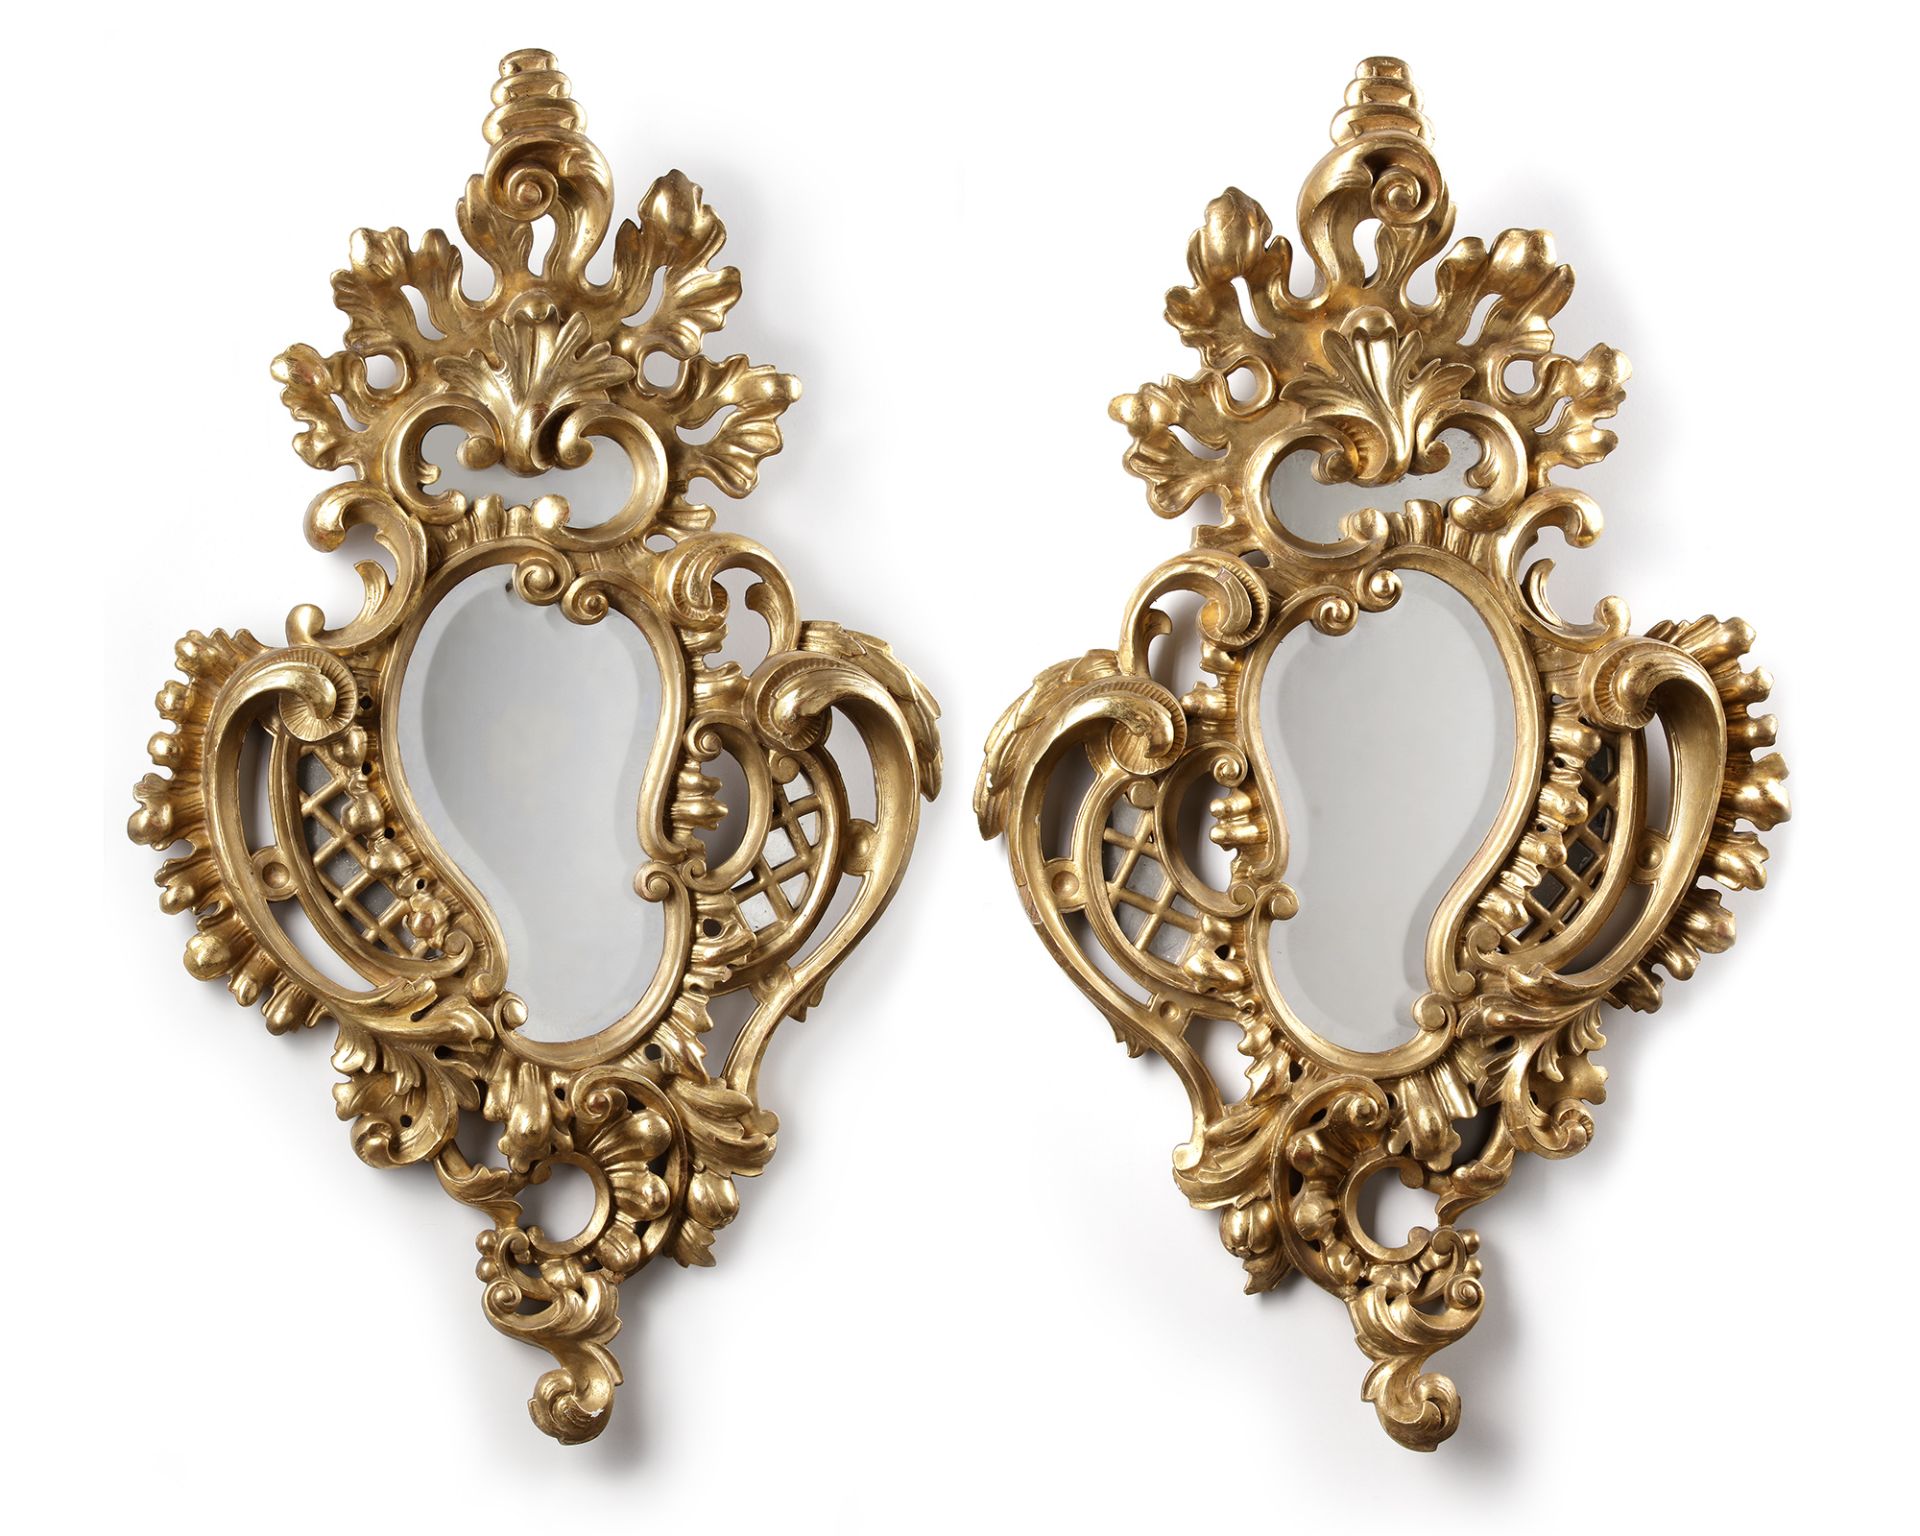 A PAIR OF LOUIS XV STYLE MIRRORS, 19TH CENTURY